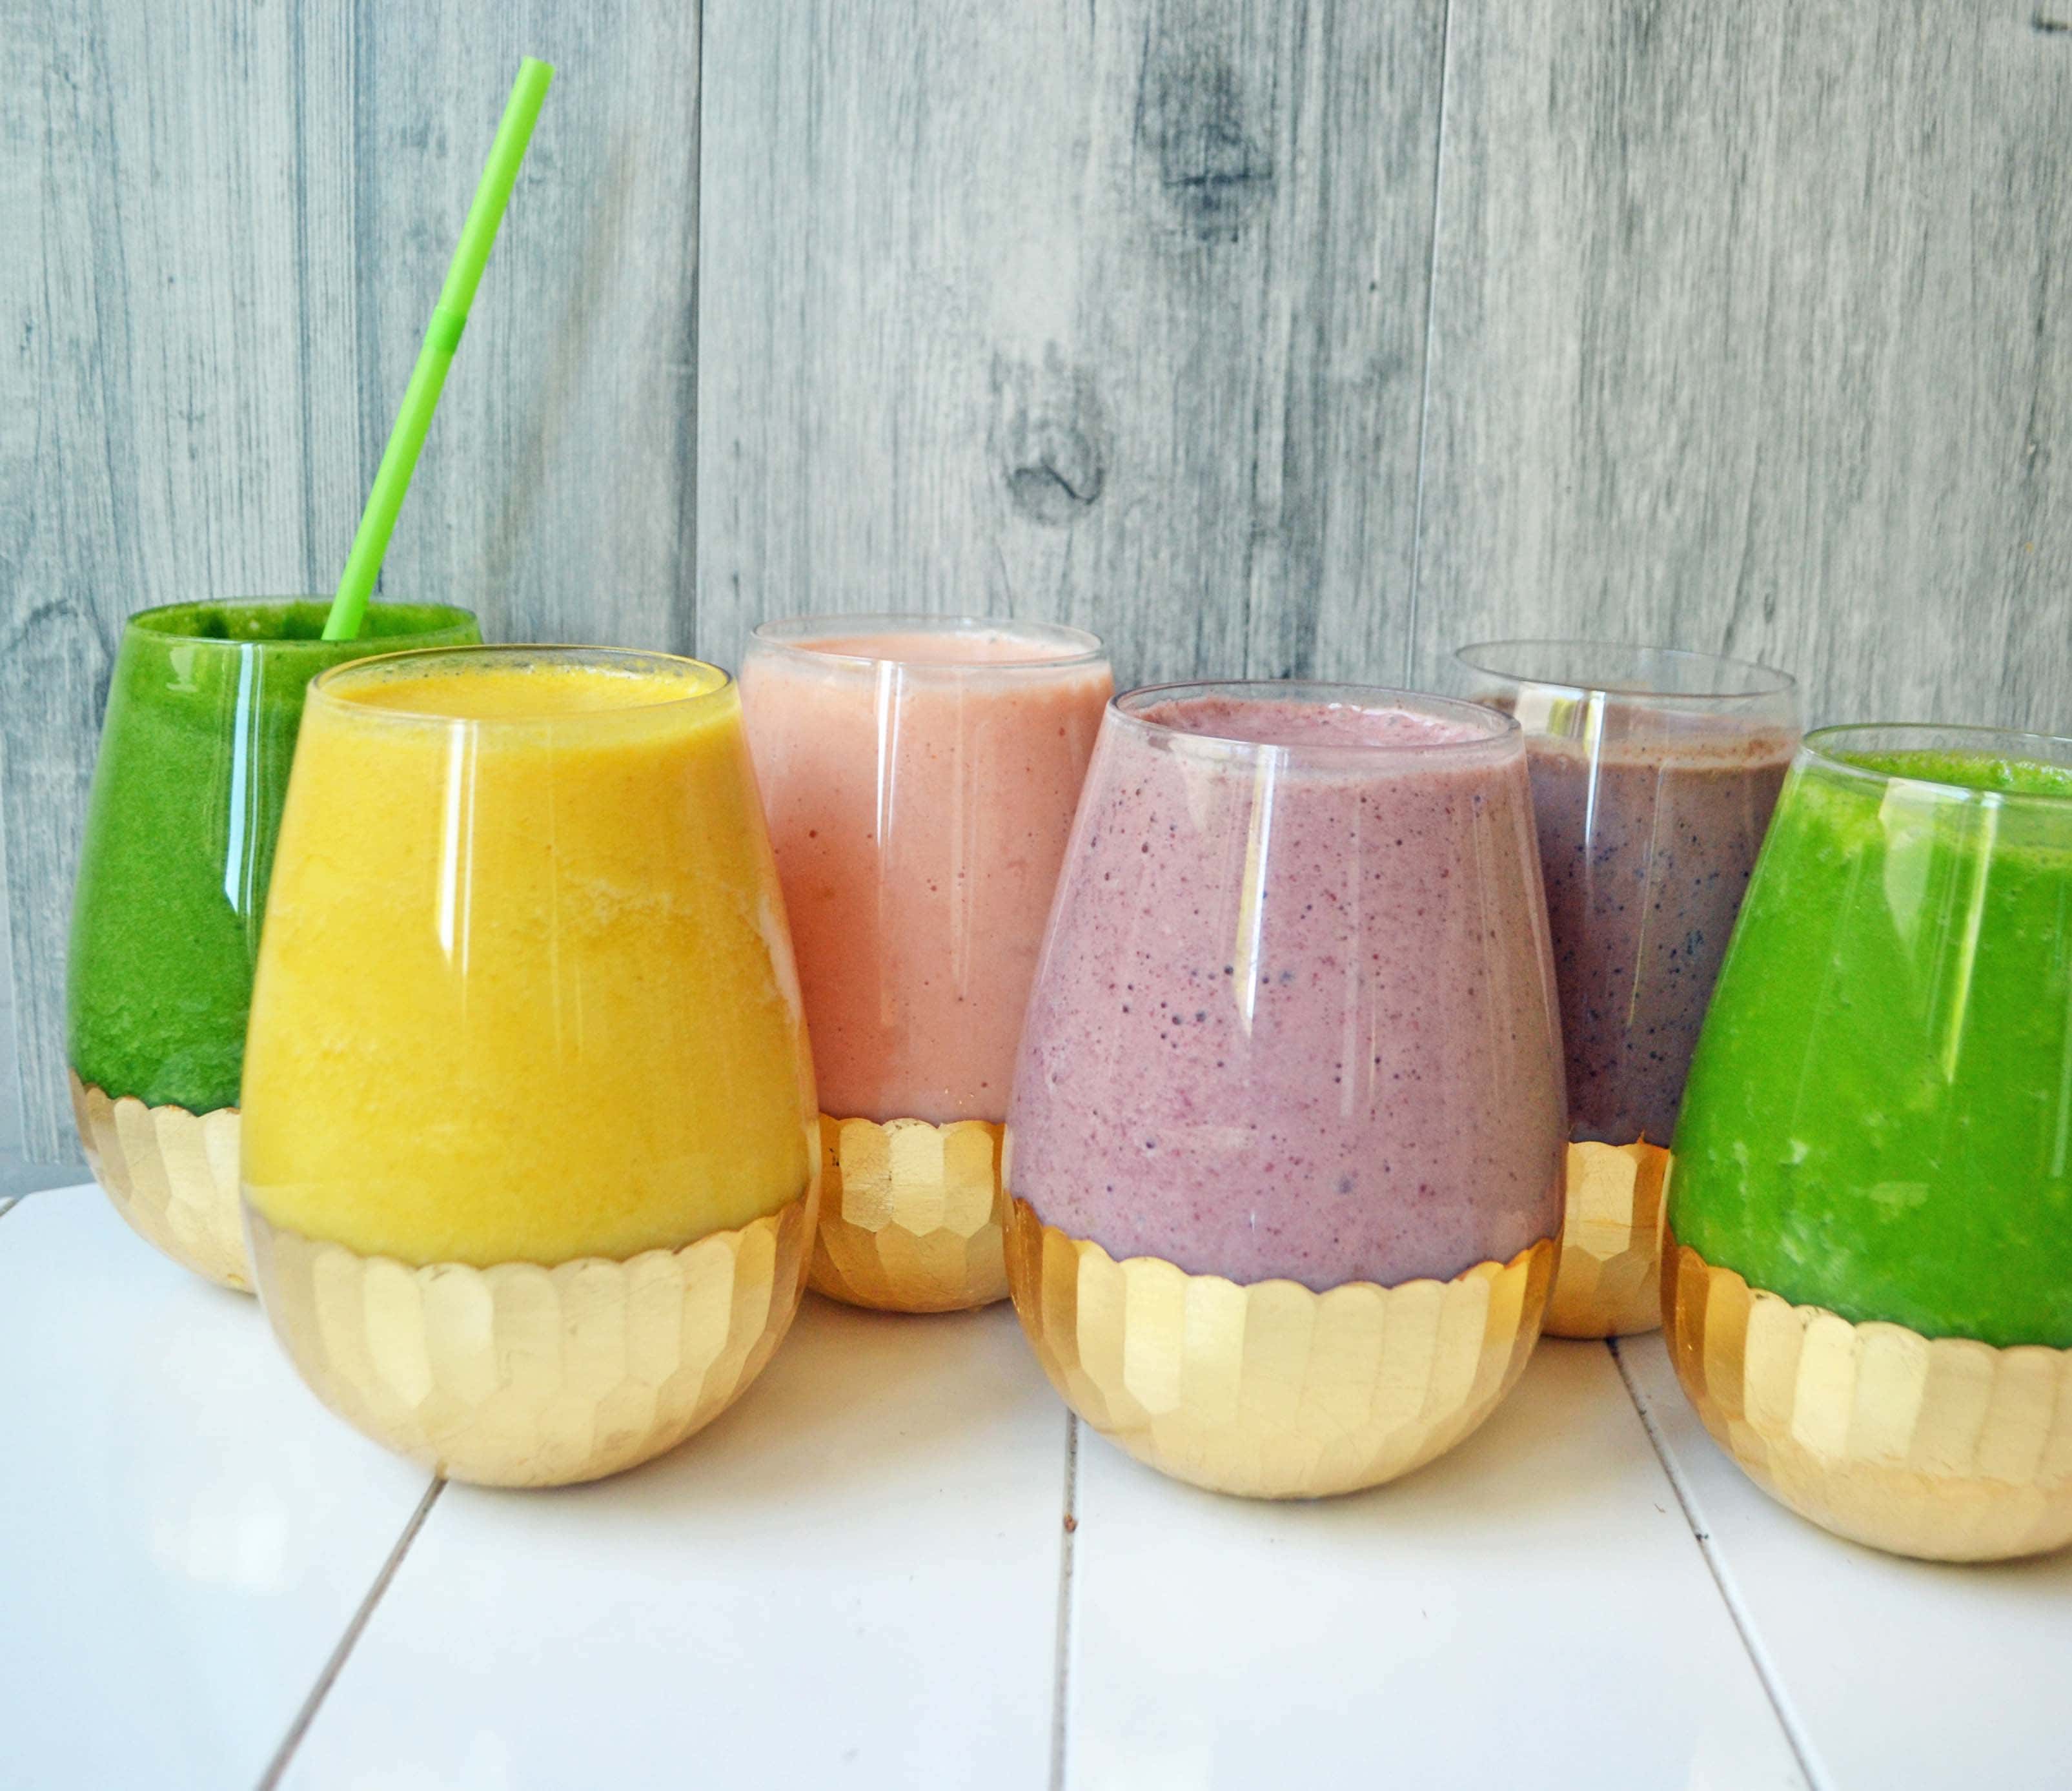 Superfood Smoothie Recipes. 6 Fresh and Healthy Smoothie Recipes. How to feel healthy drinking smoothies every day. www.modernhoney.com #smoothies #healthy #smoothierecipes 